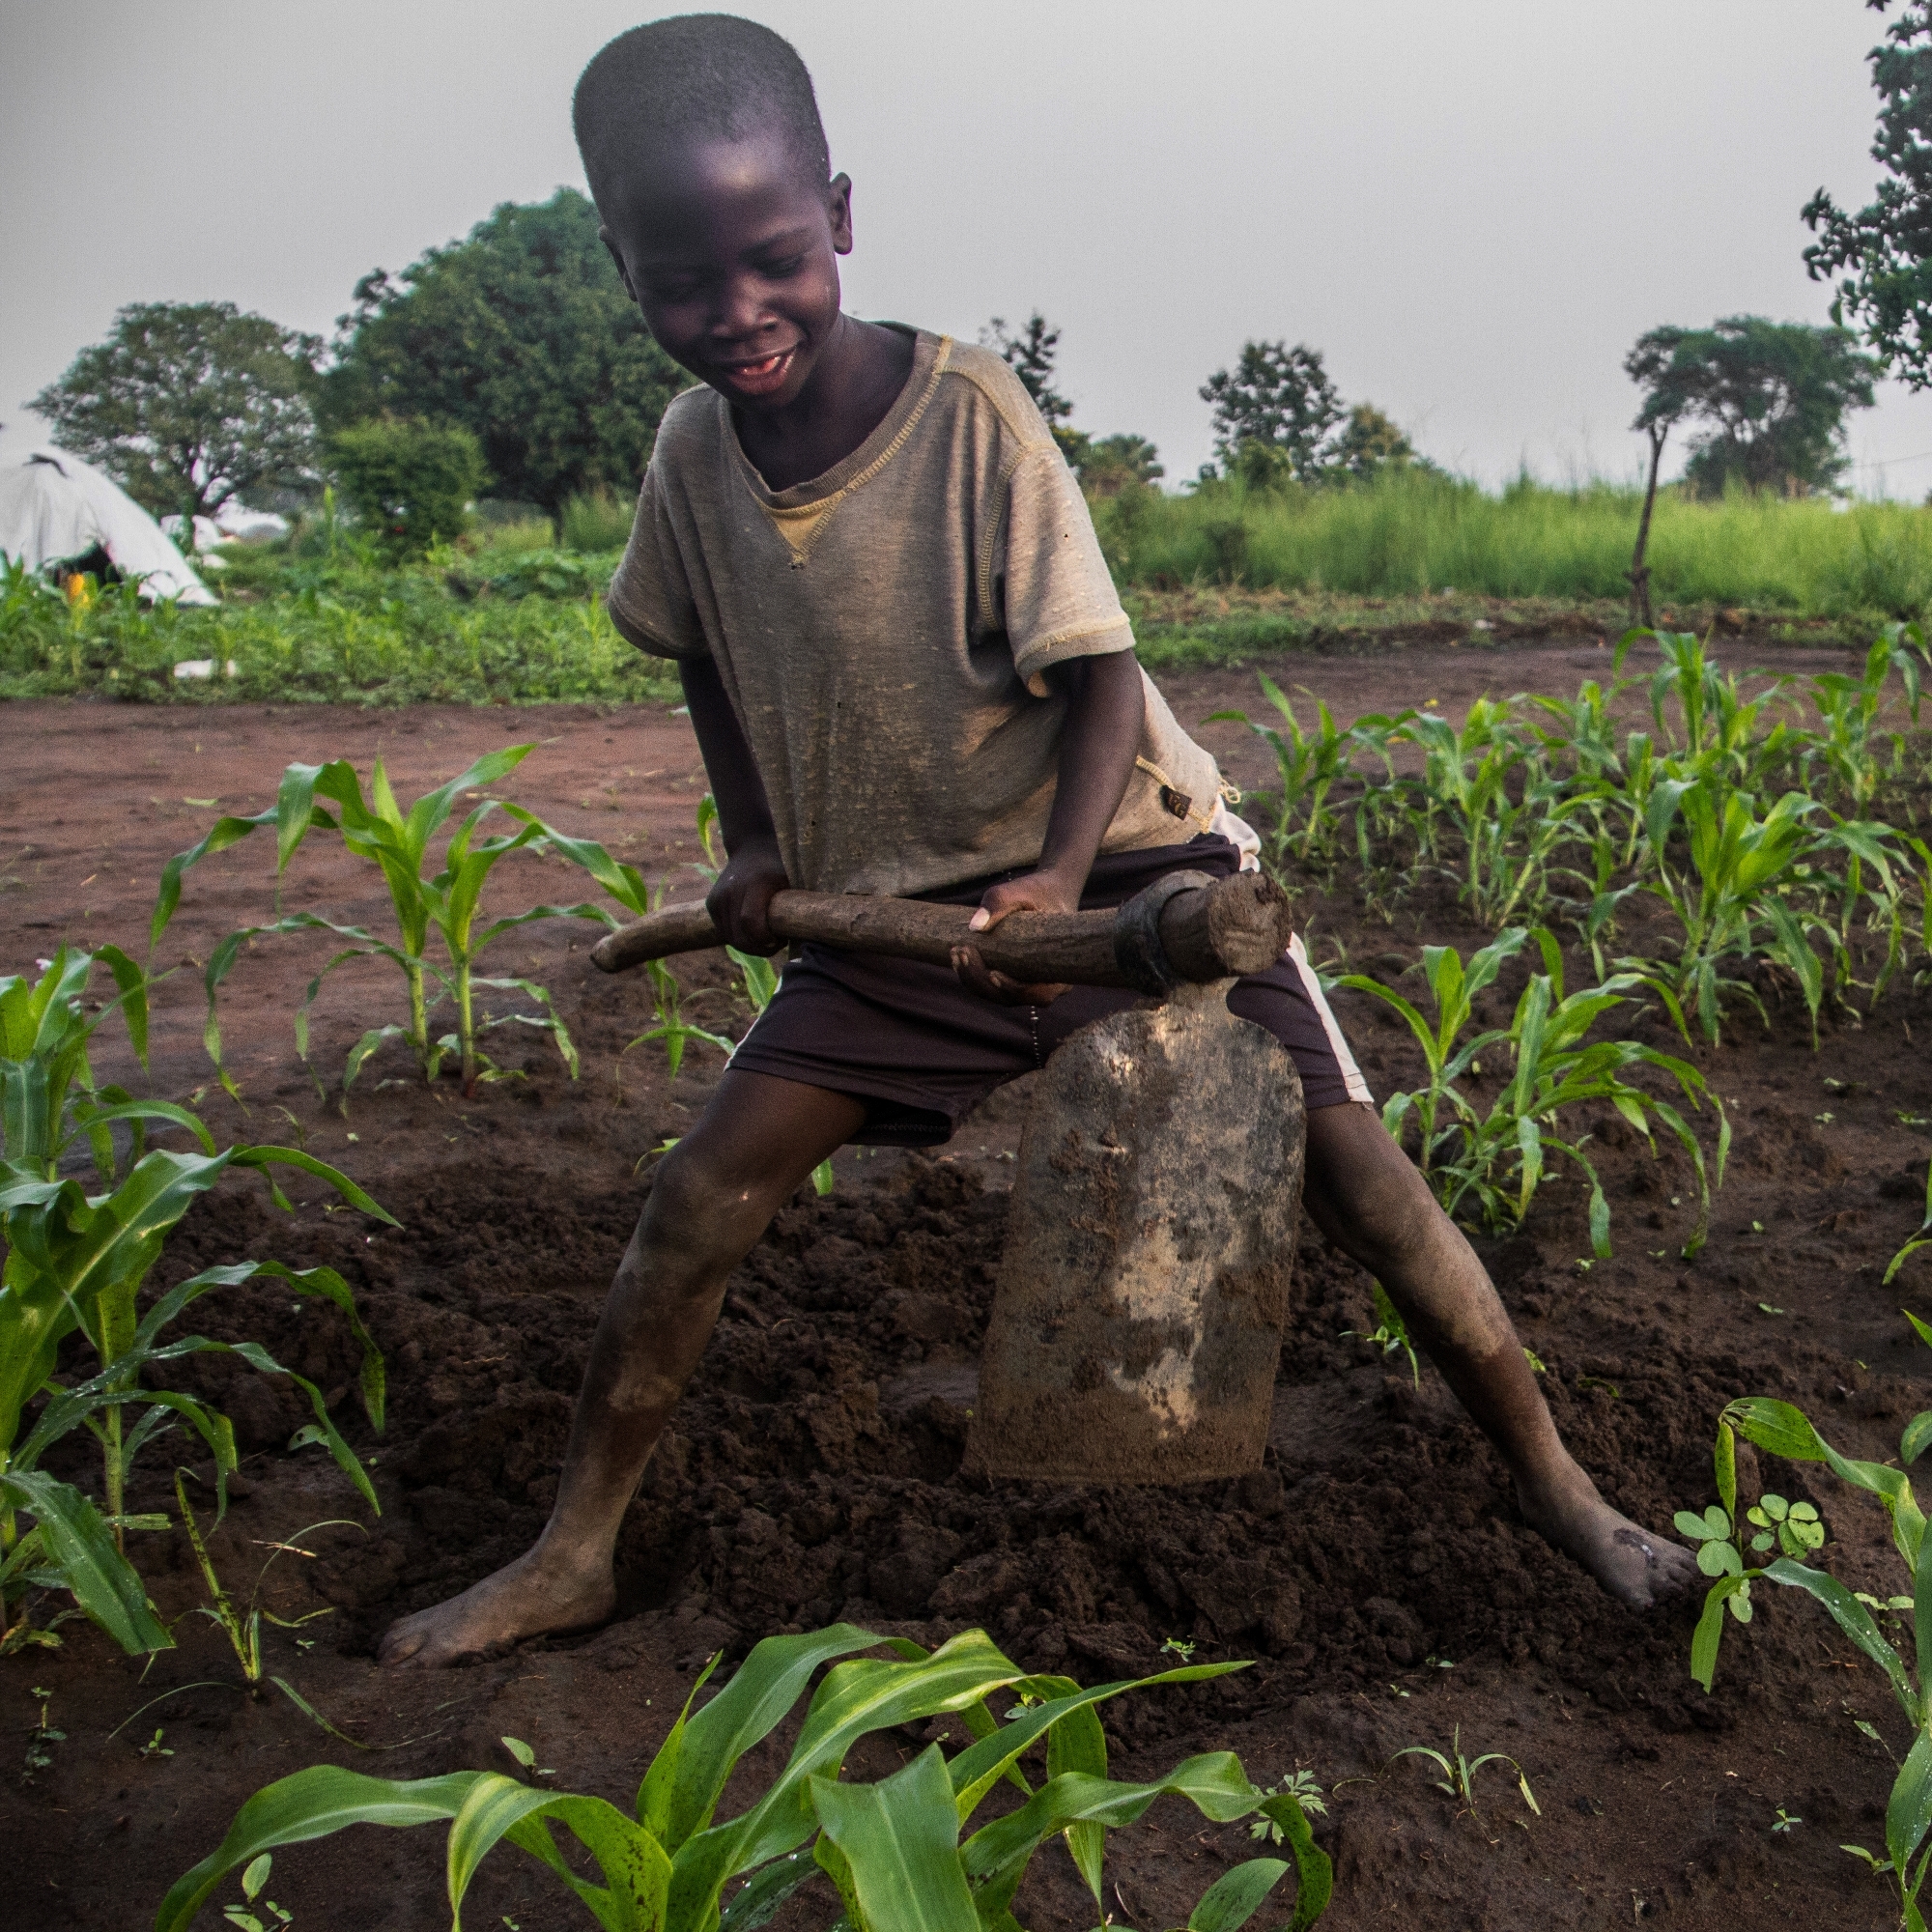 Joseph* digs on his family's small plot of land where they have planted maize. He lives in Boroli Camp, Uganda, where he attends Save the Children's child-friendly space. Photo Credit: Mark Kaye/Save the Children 2014.